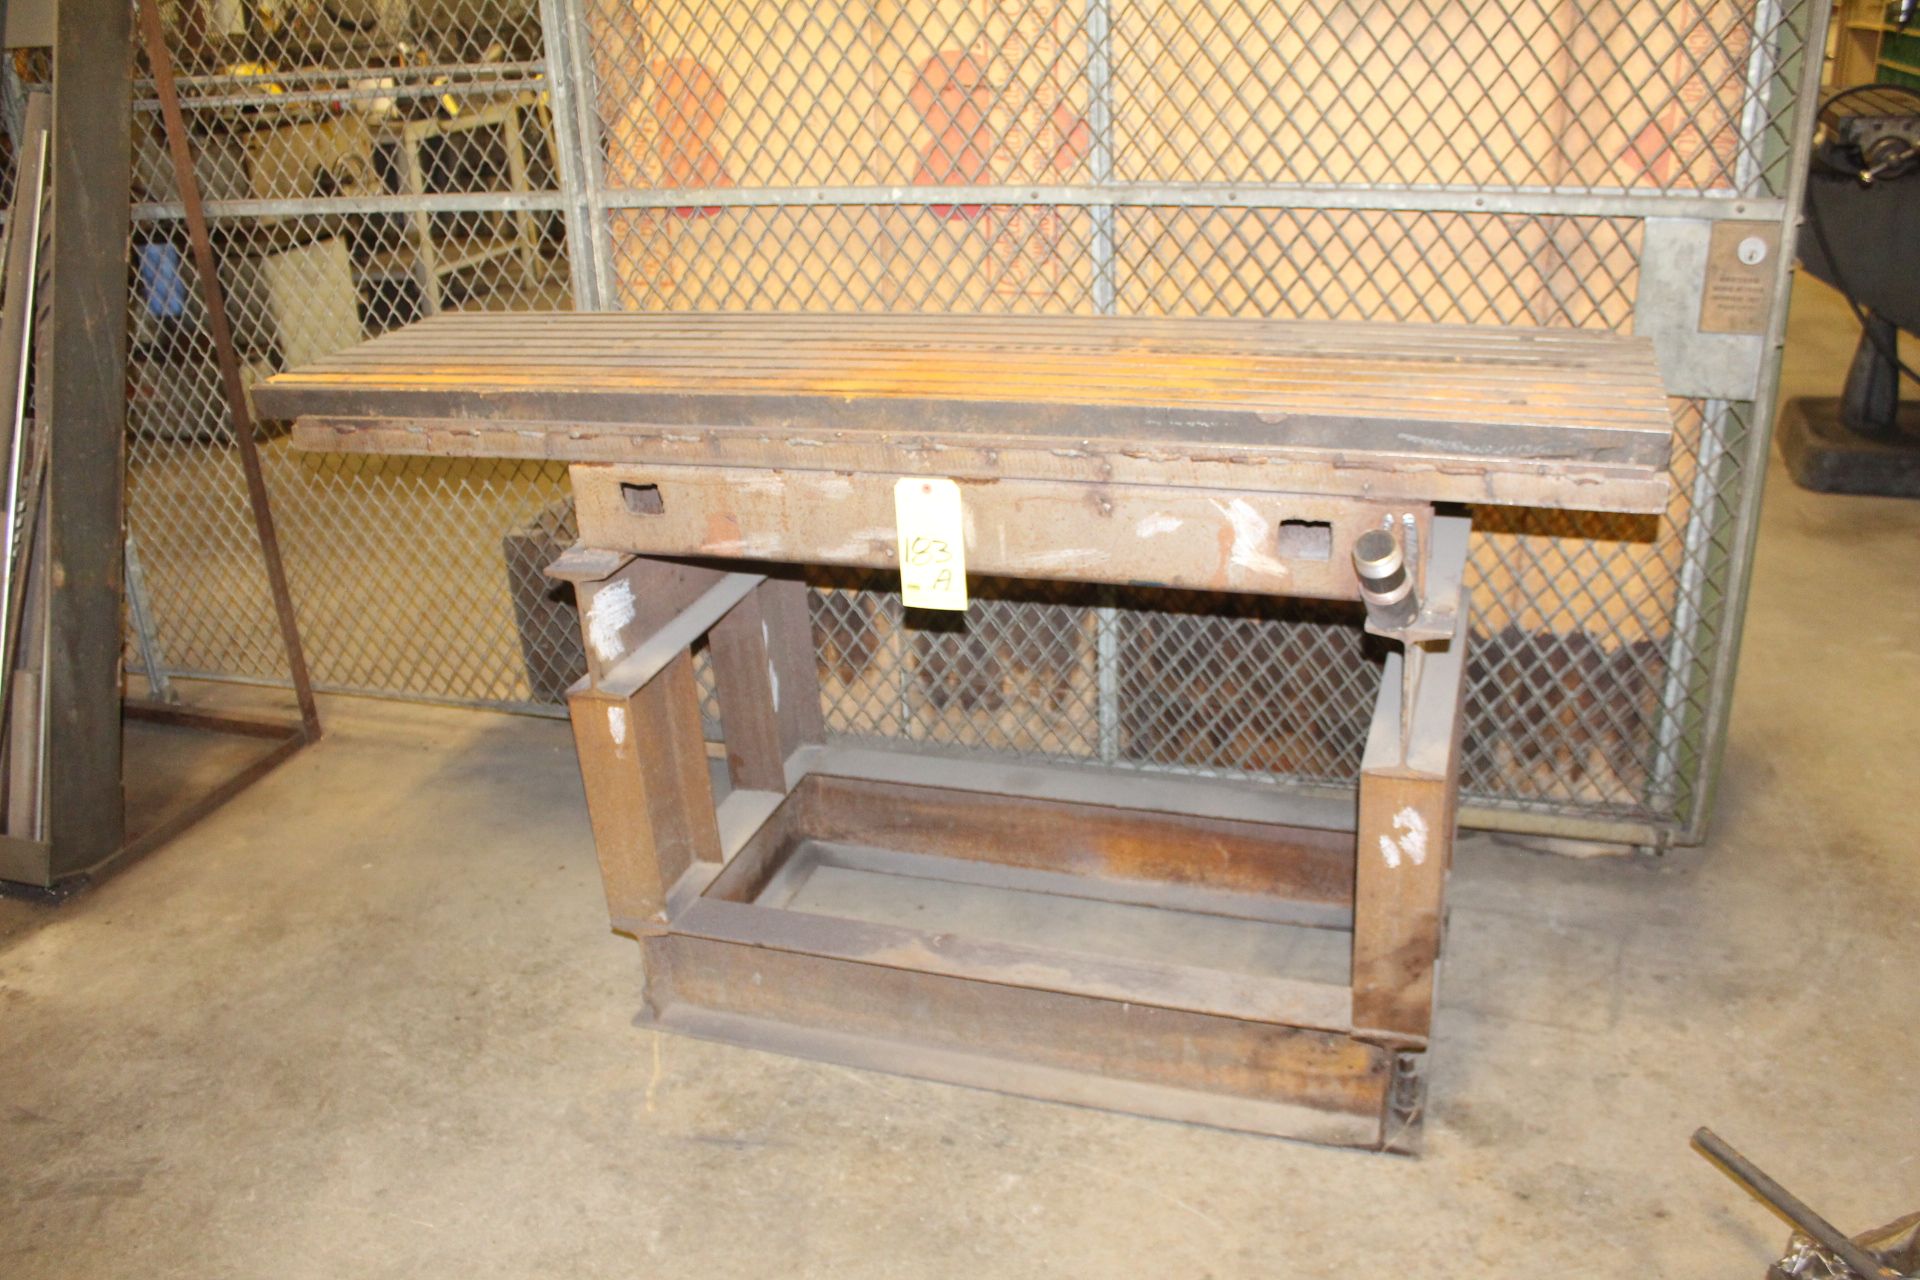 T-SLOTTED TABLE, 18" x 71-1/2"